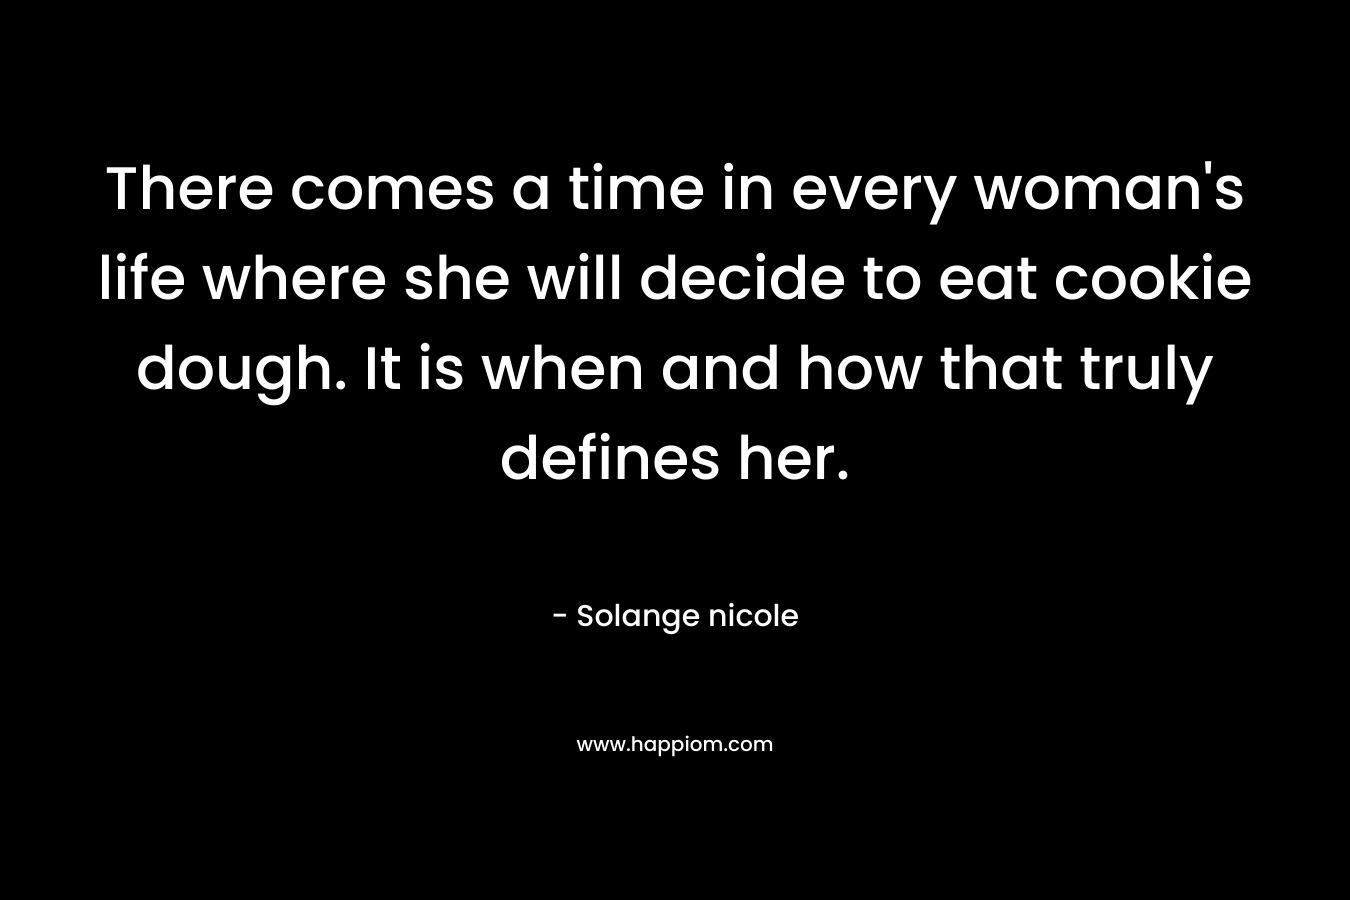 There comes a time in every woman’s life where she will decide to eat cookie dough. It is when and how that truly defines her. – Solange nicole